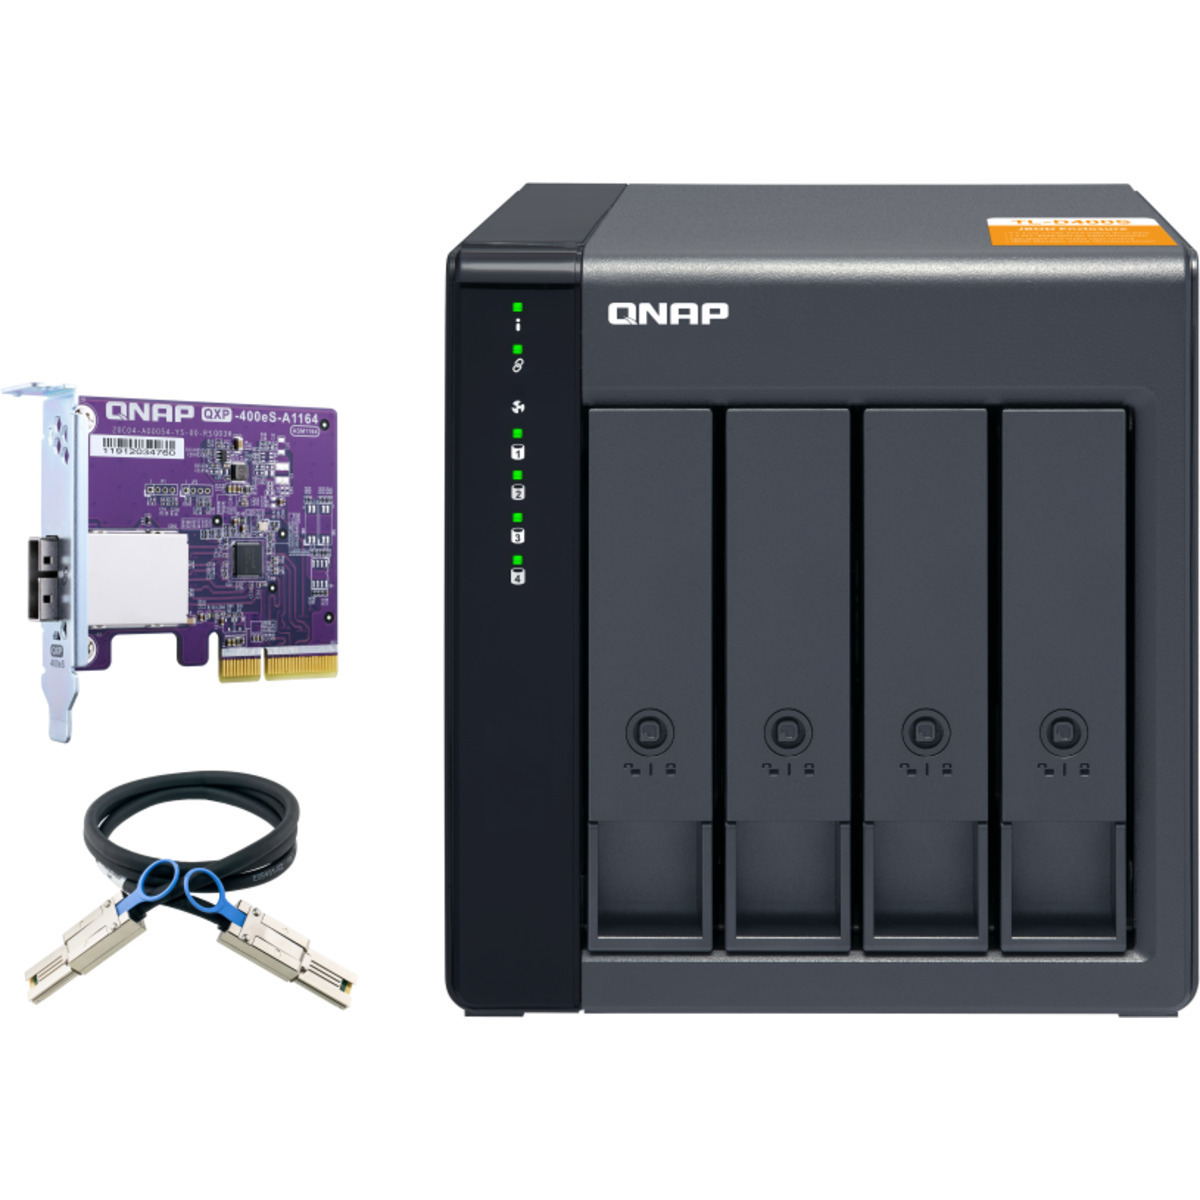 buy QNAP TL-D400S External Expansion Drive 4tb Desktop Expansion Enclosure 4x1000gb Samsung 870 EVO MZ-77E1T0BAM 2.5 560/530MB/s SATA 6Gb/s SSD CONSUMER Class Drives Installed - Burn-In Tested - nas headquarters buy network attached storage server device das new raid-5 free shipping usa spring sale TL-D400S External Expansion Drive